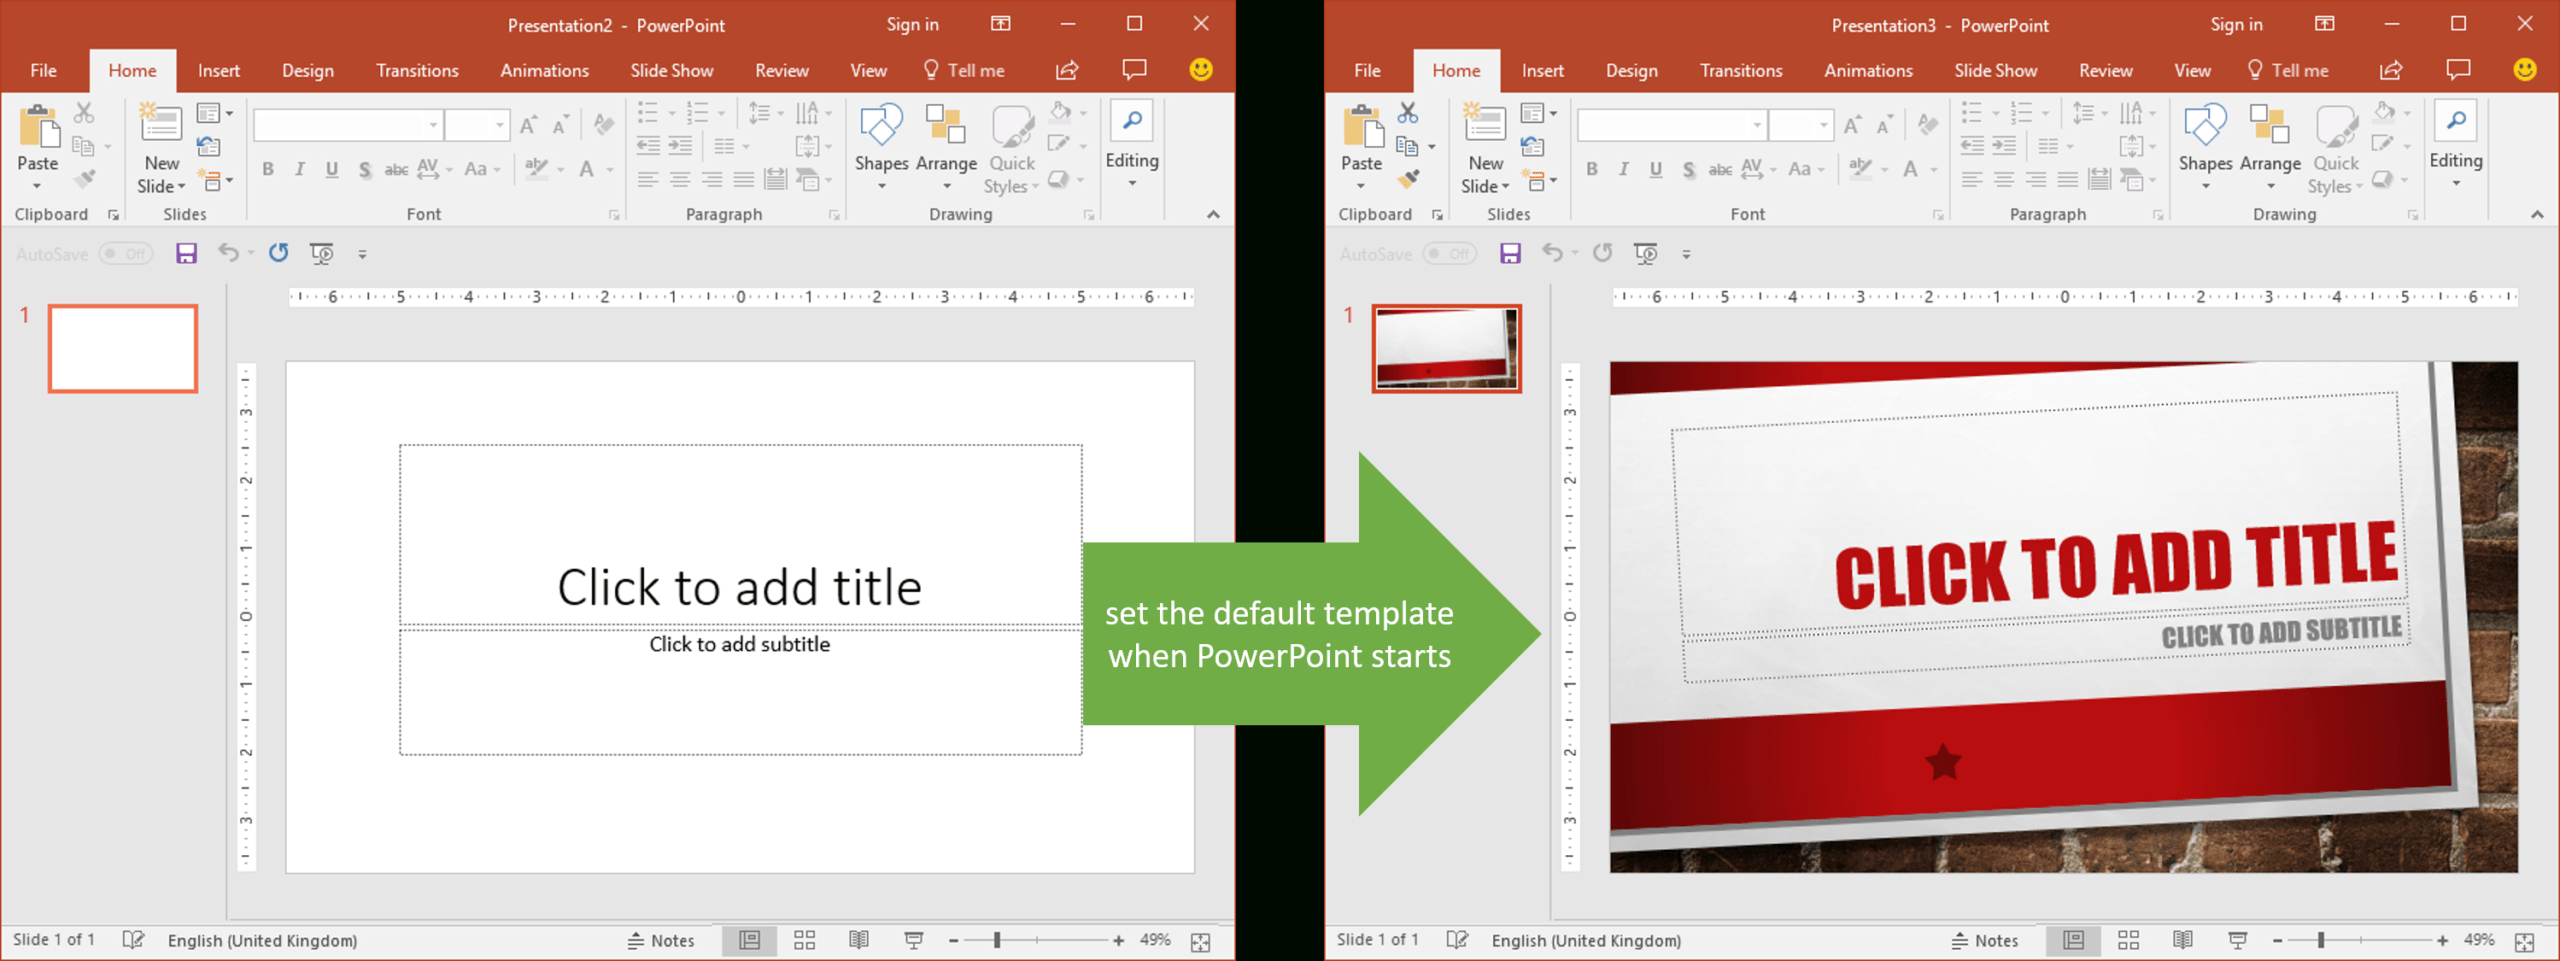 Set The Default Template When Powerpoint Starts | Youpresent Inside Powerpoint Replace Template